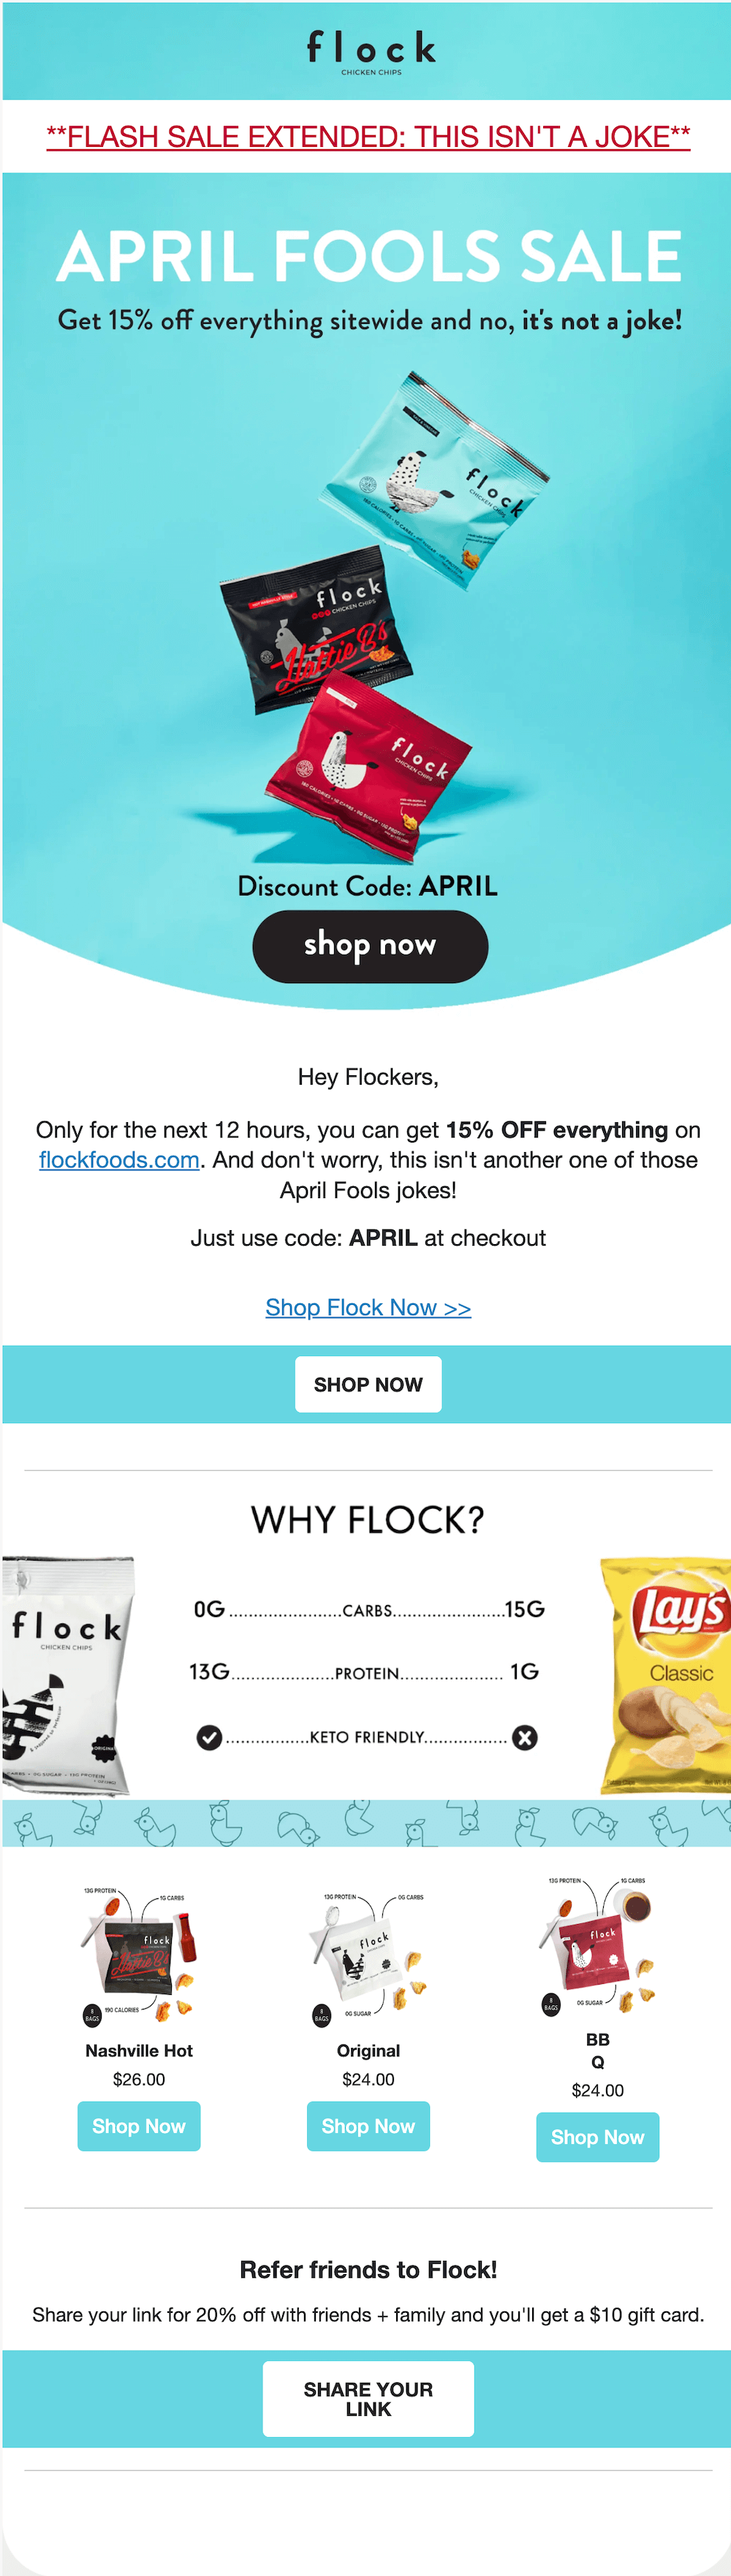 Image shows an April Fools’ Day email from Flock Foods